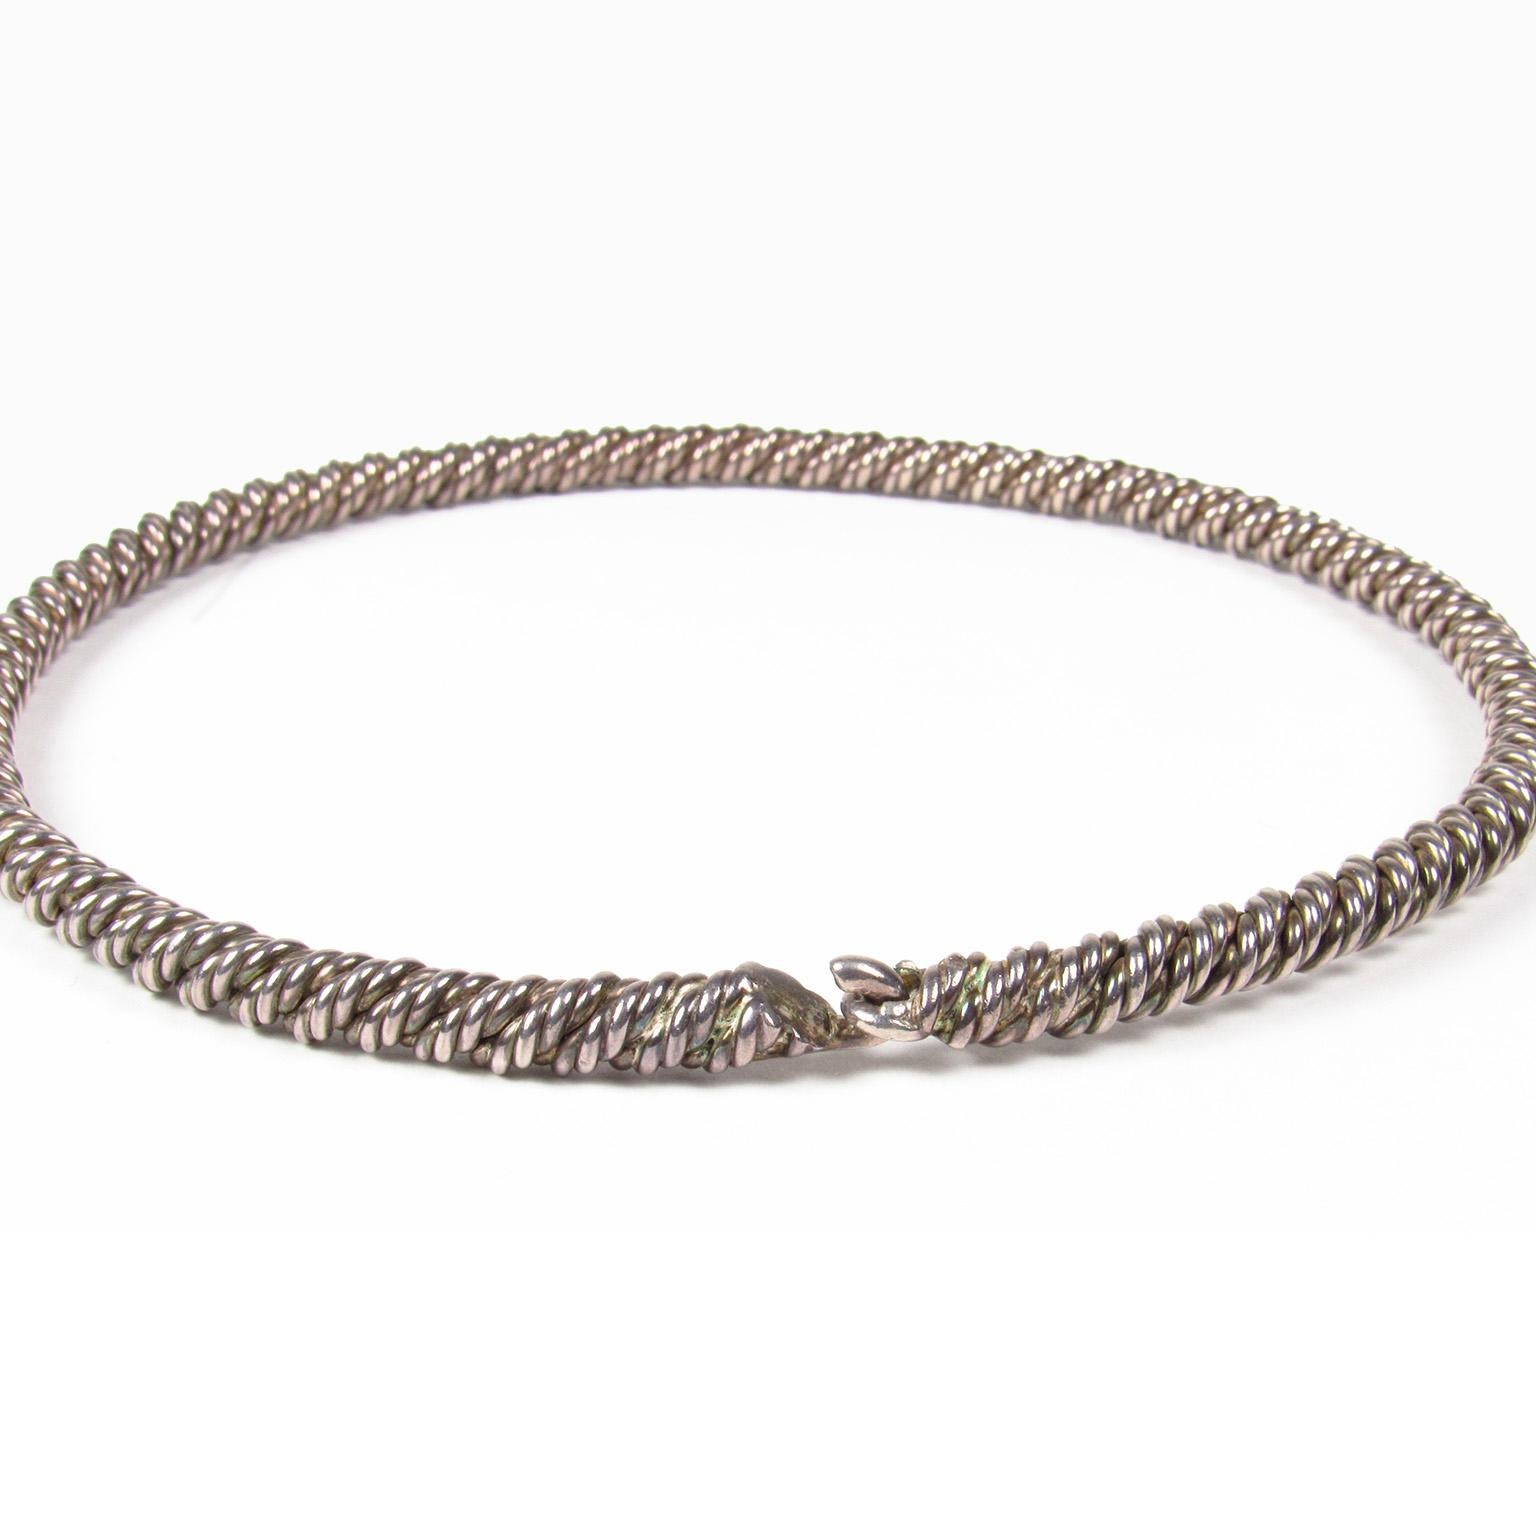 Vintage Hermes silver rope twist torque necklace. Diameter: 5 inches, width: 1/4 inches. Marked Hermès and Paris on clasp.